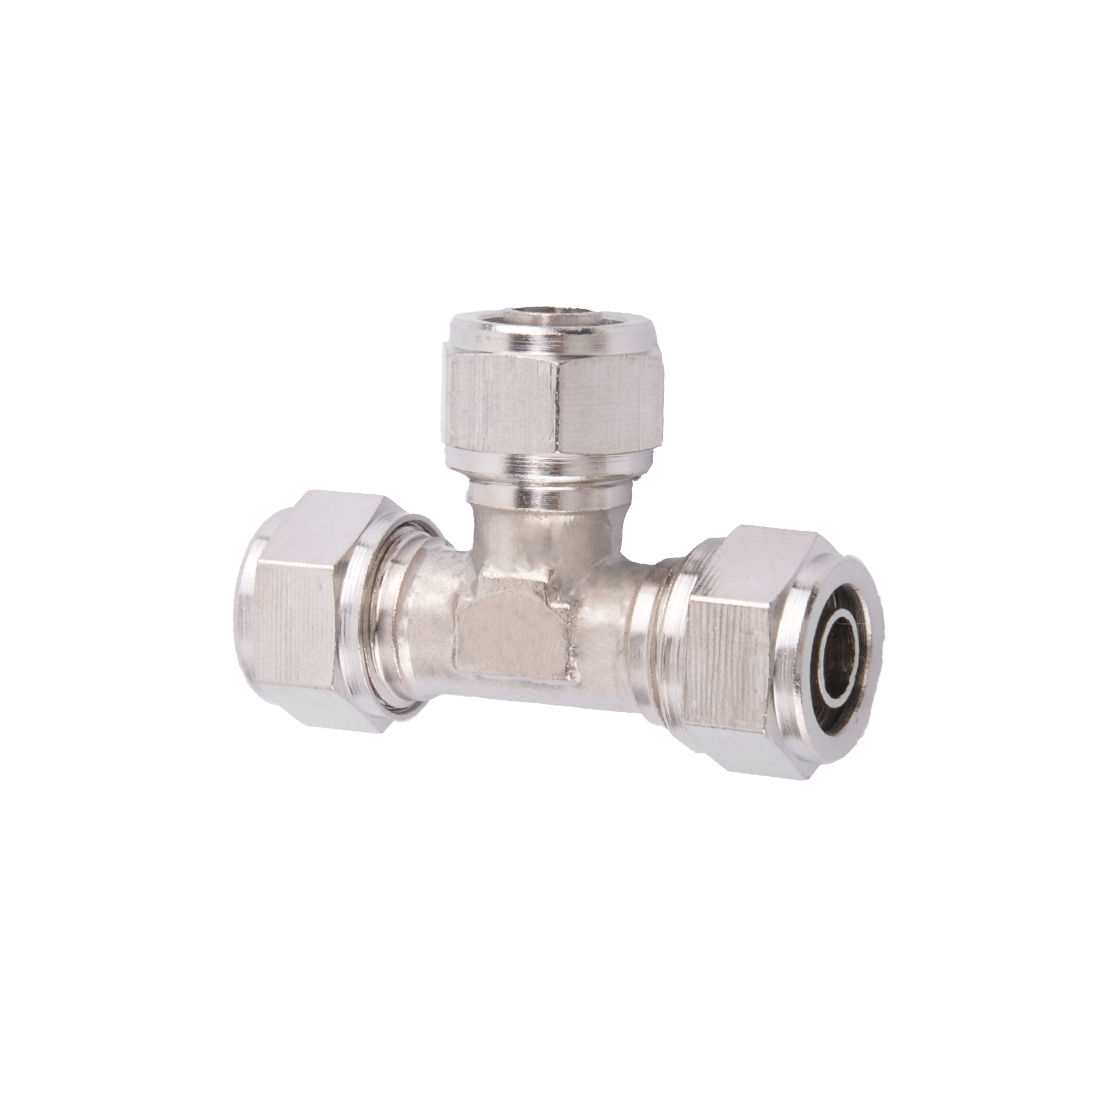 SNS KLE Series pipe fitting pneumatic brass quick coupling three way fitting